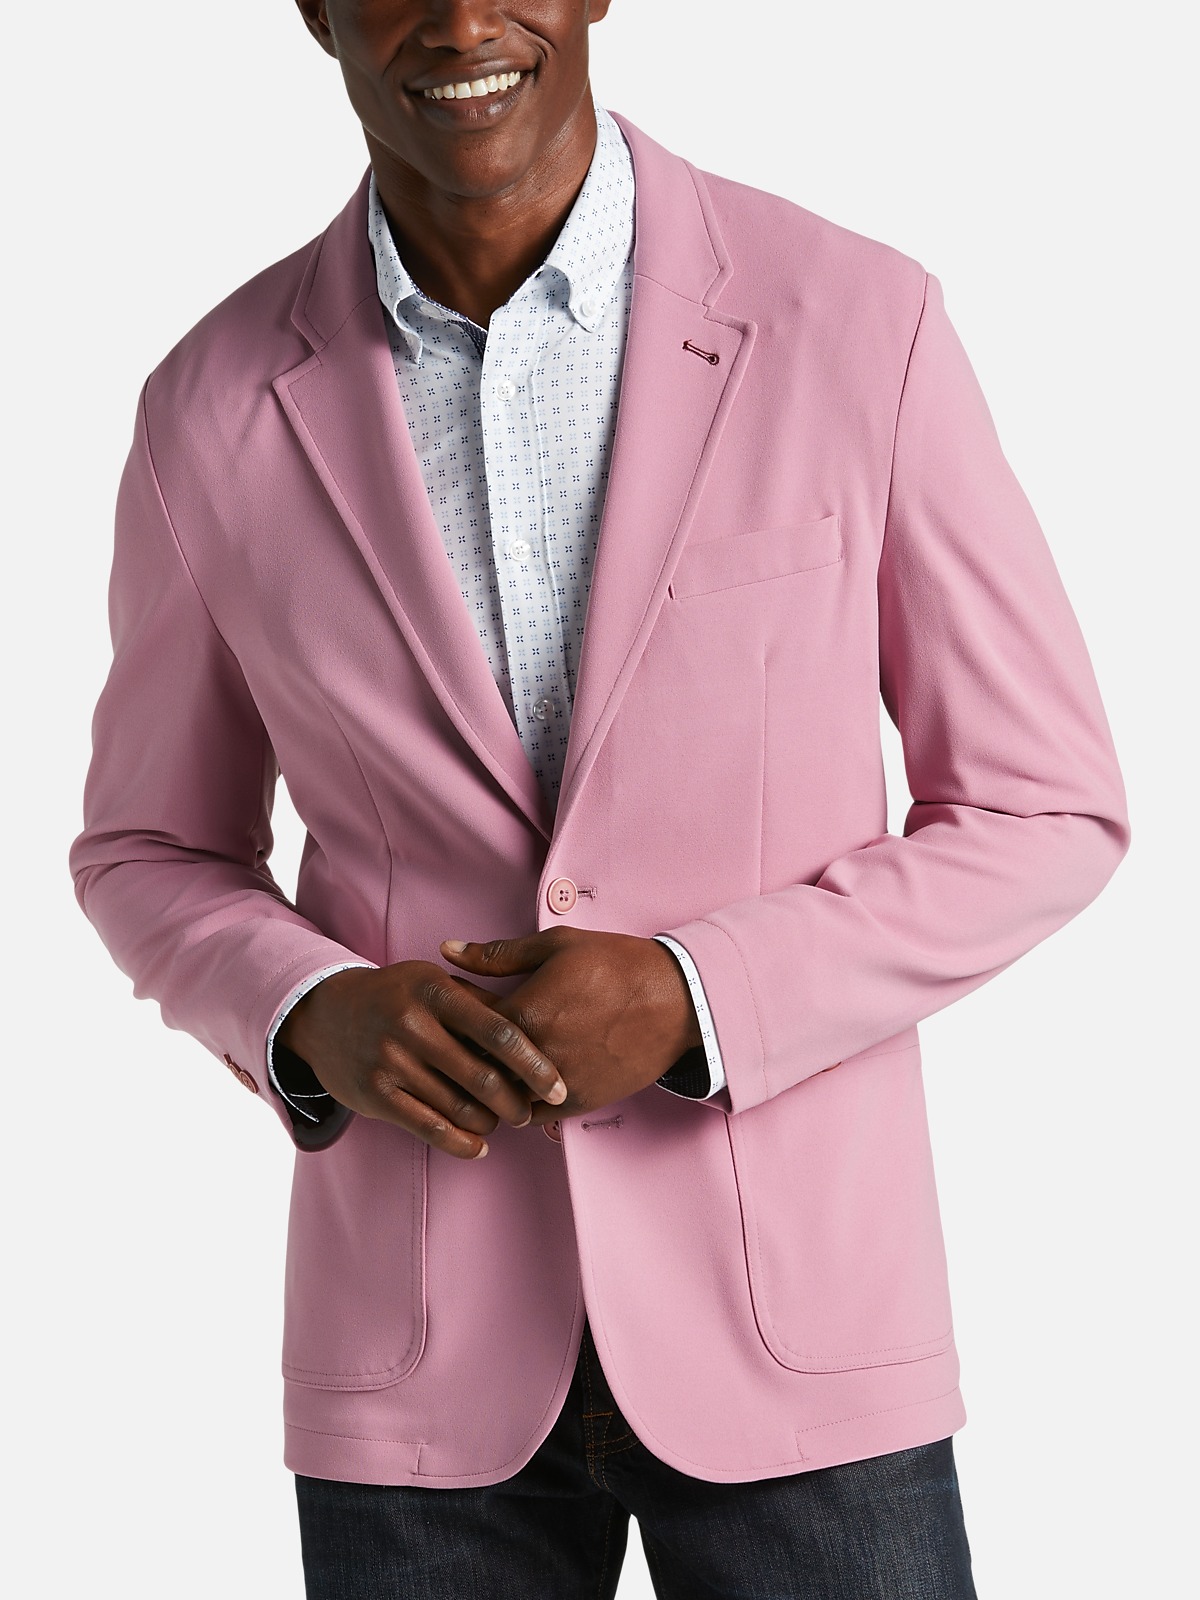 Michael Strahan Modern Fit Crepe Knit Sport Coat All Clearance 3999 Mens Wearhouse 